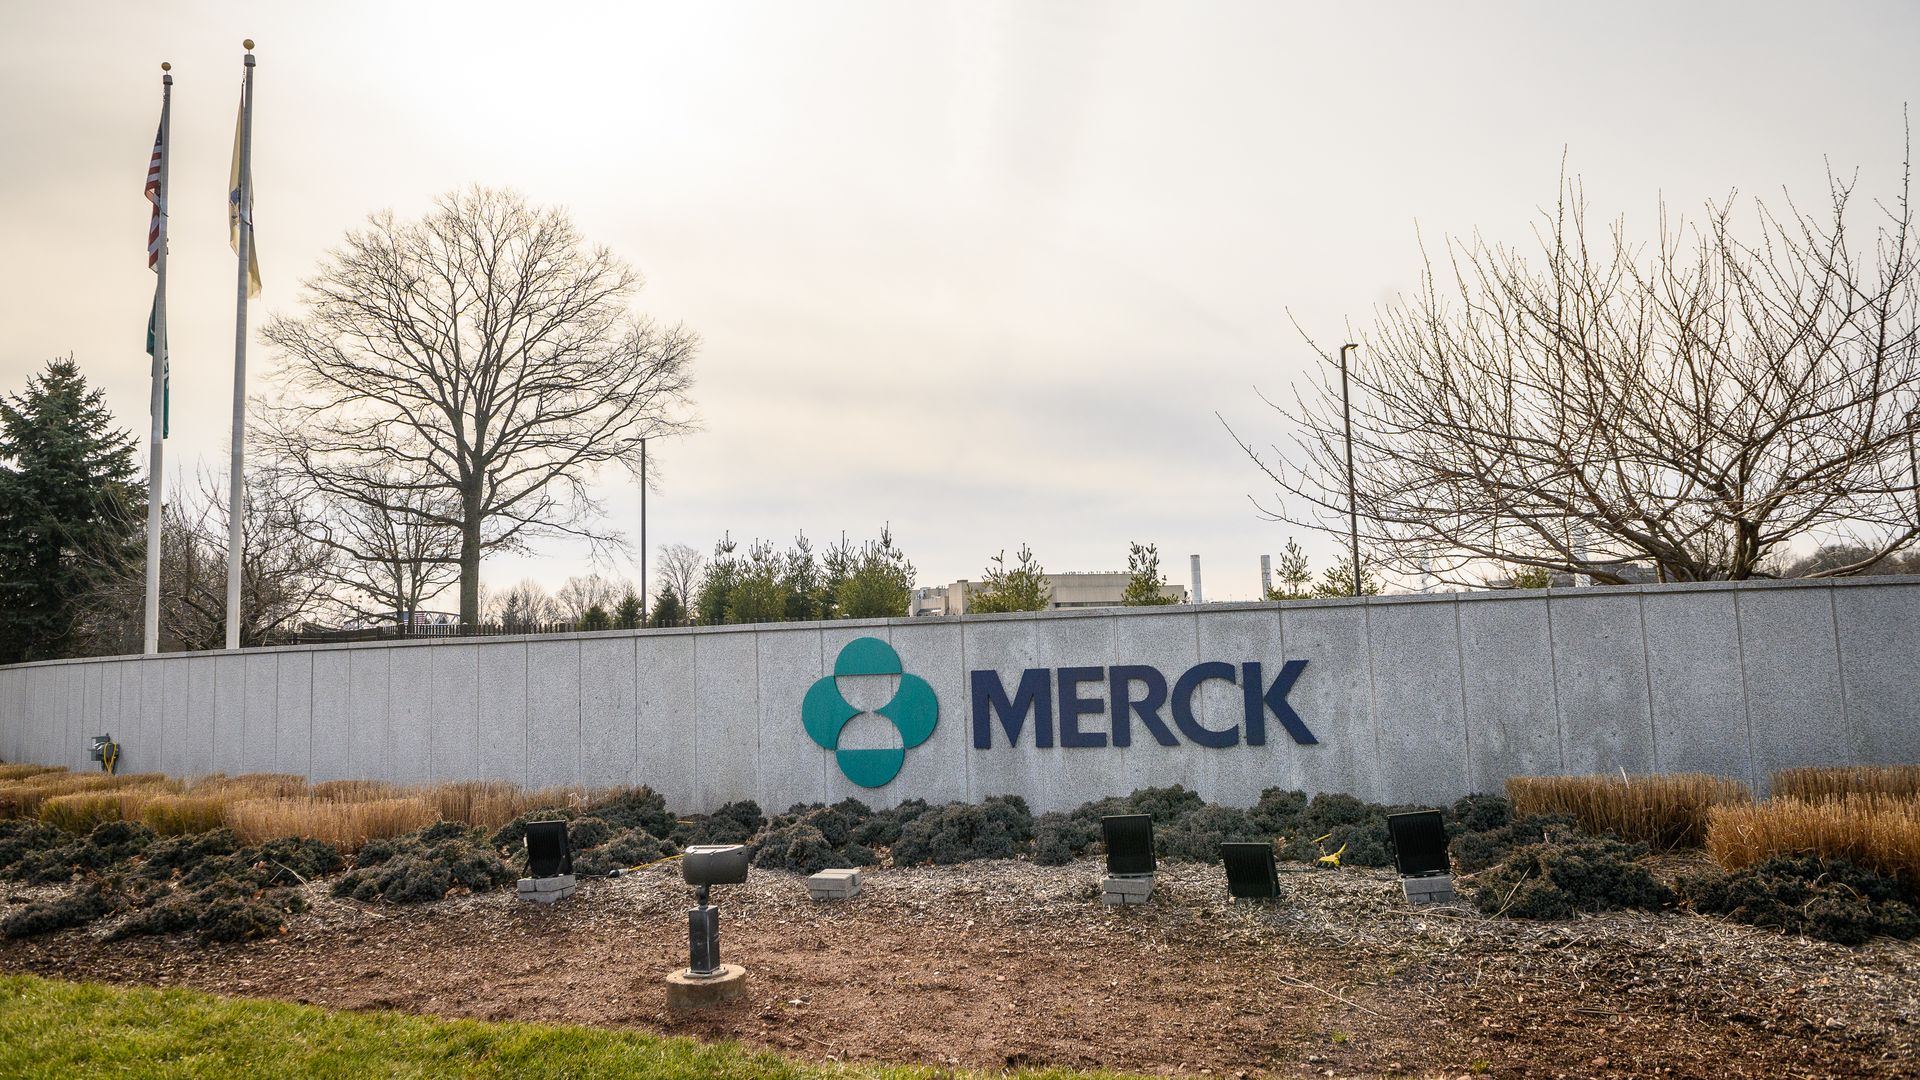 Merck signage outside of the company's headquarters in Kenilworth, New Jersey.